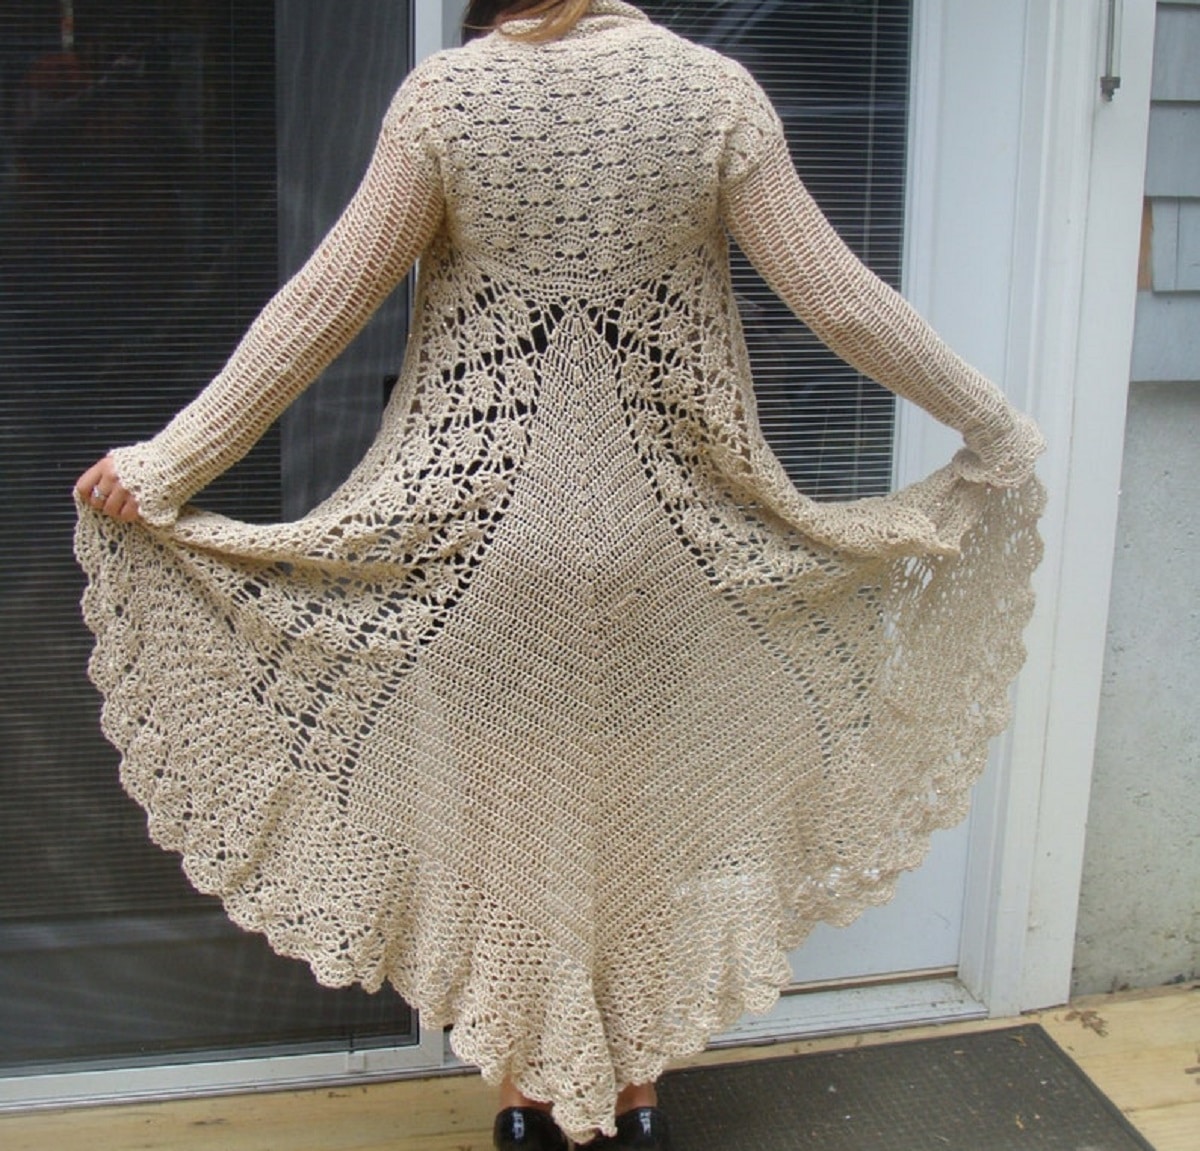 The back of a woman wearing a beige long sleeved full length crochet sweater standing in front of a glass door.